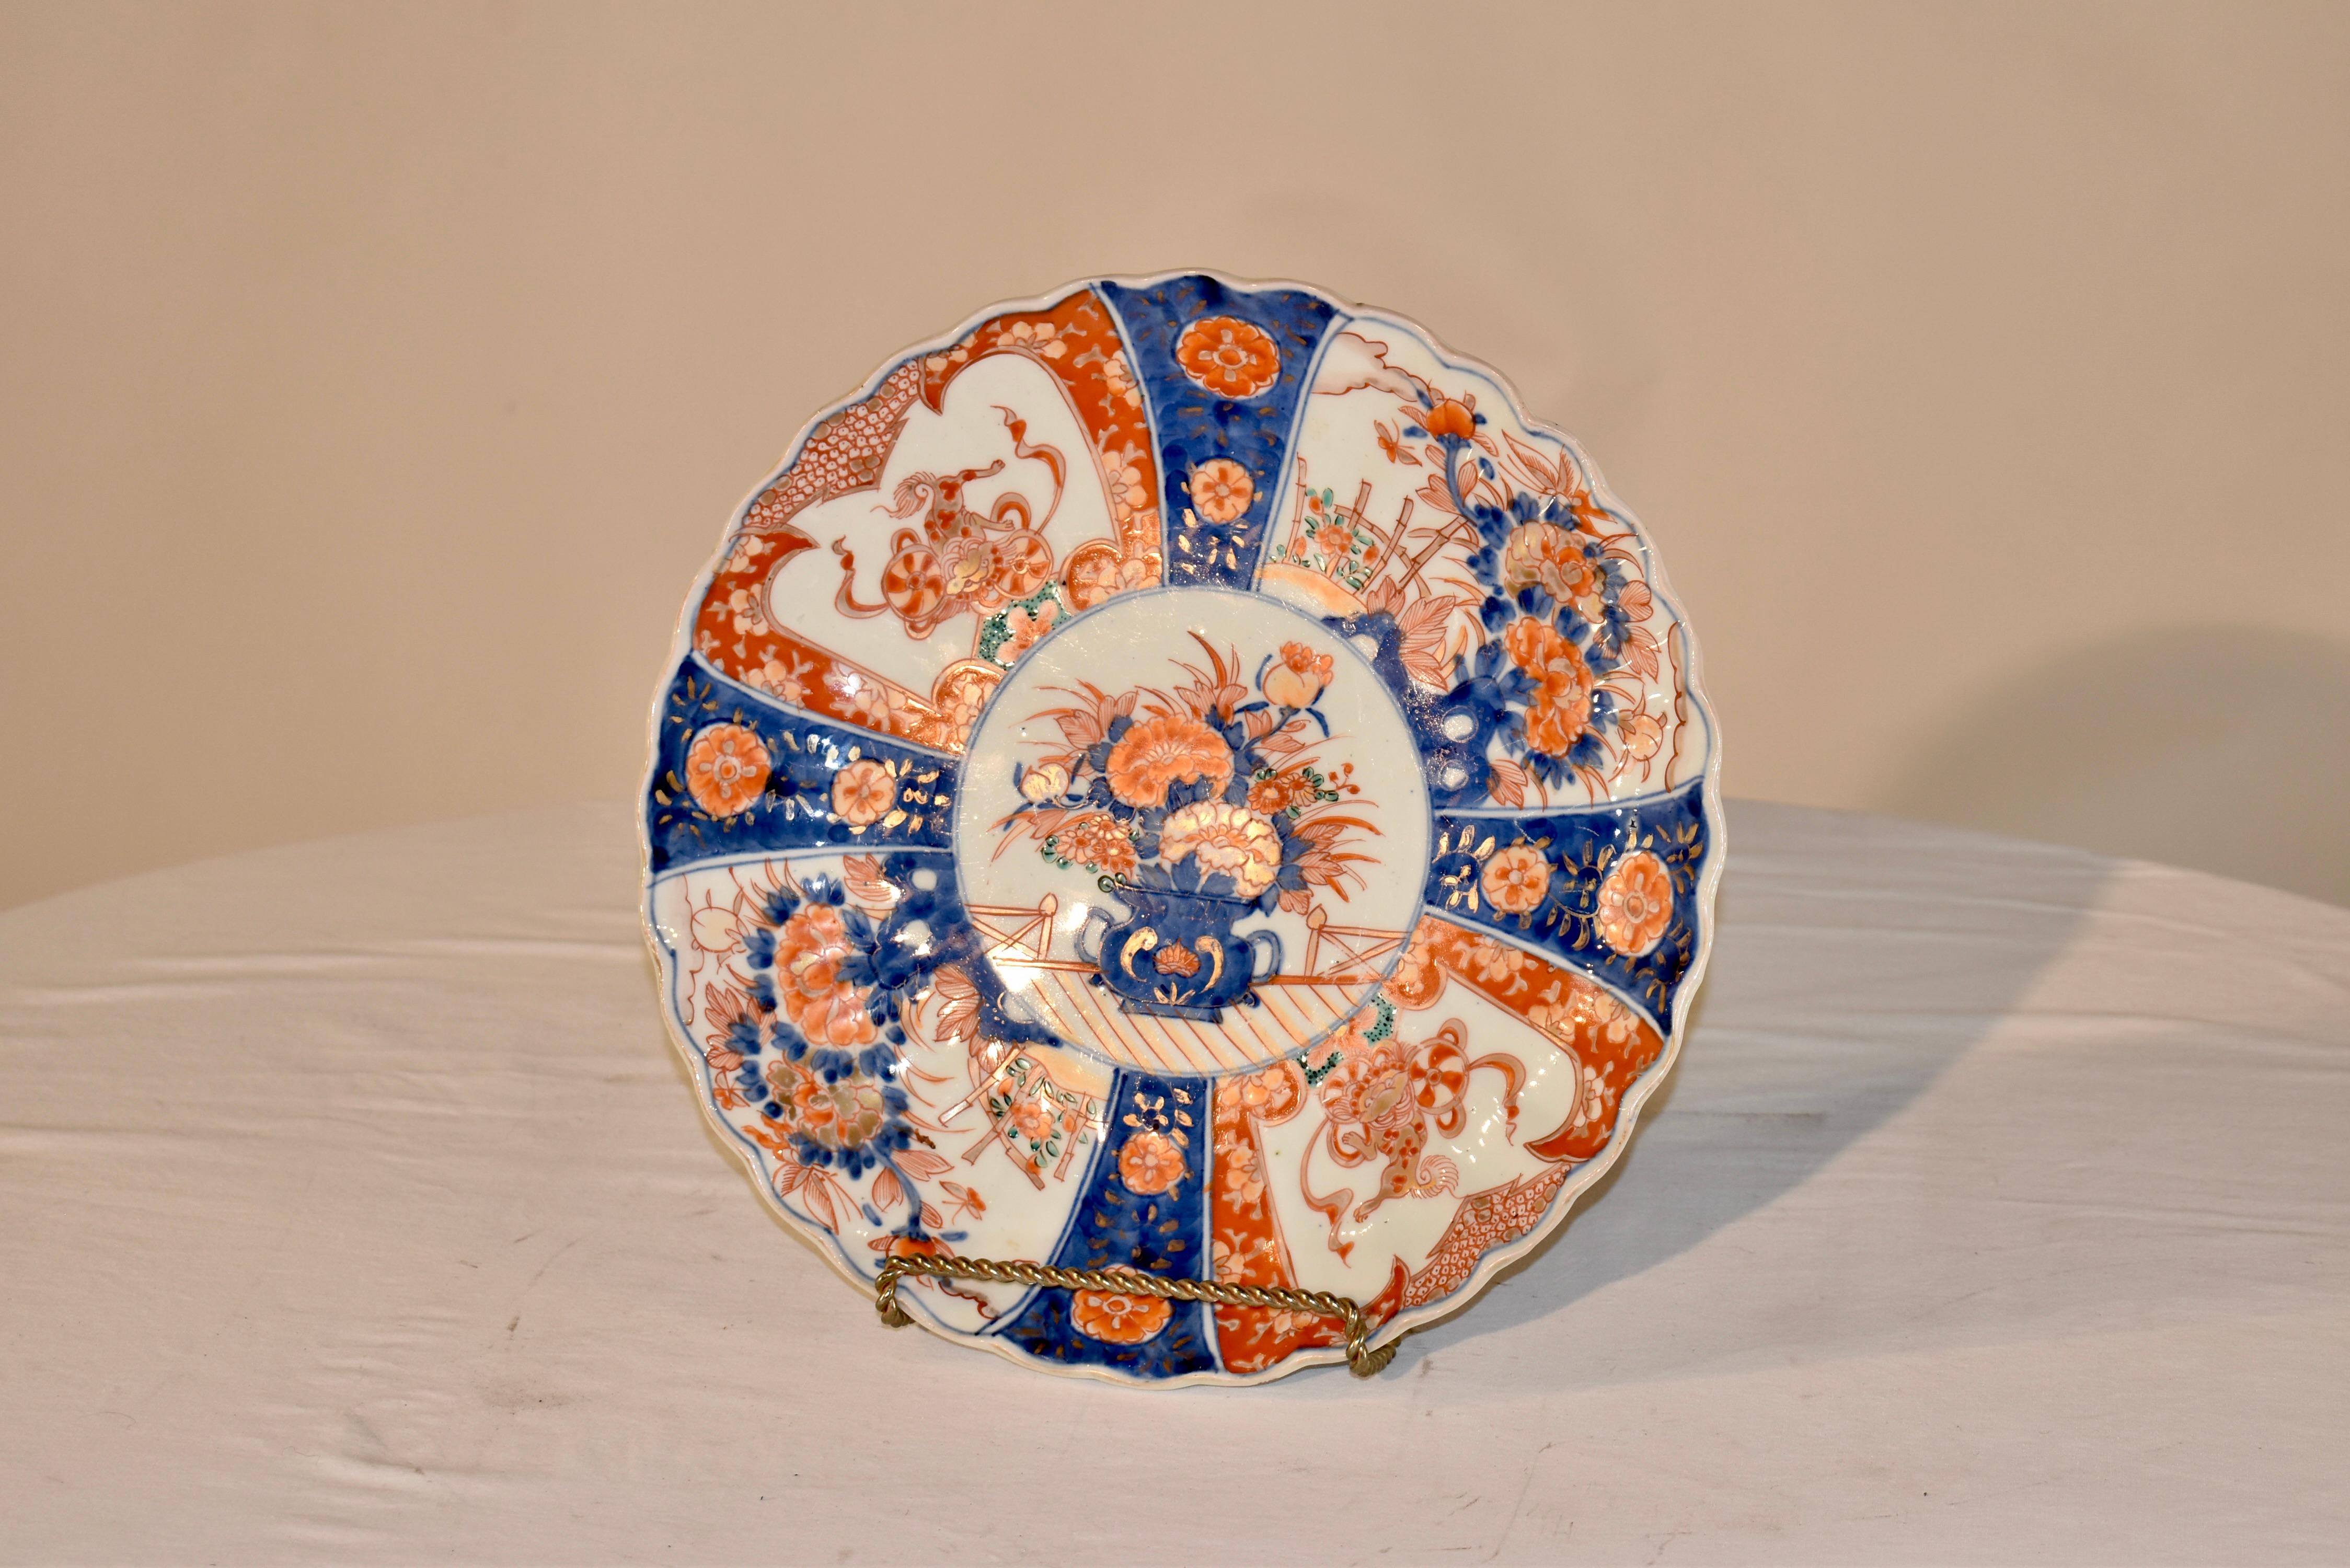 Late 19th century Imari plate. This is a lovely deep plate with scalloped edges. The central medallion has hand painted florals in a jardiniere, surrounded by four hand painted cobalt stripes, decorated with florals and separated by wider panels of